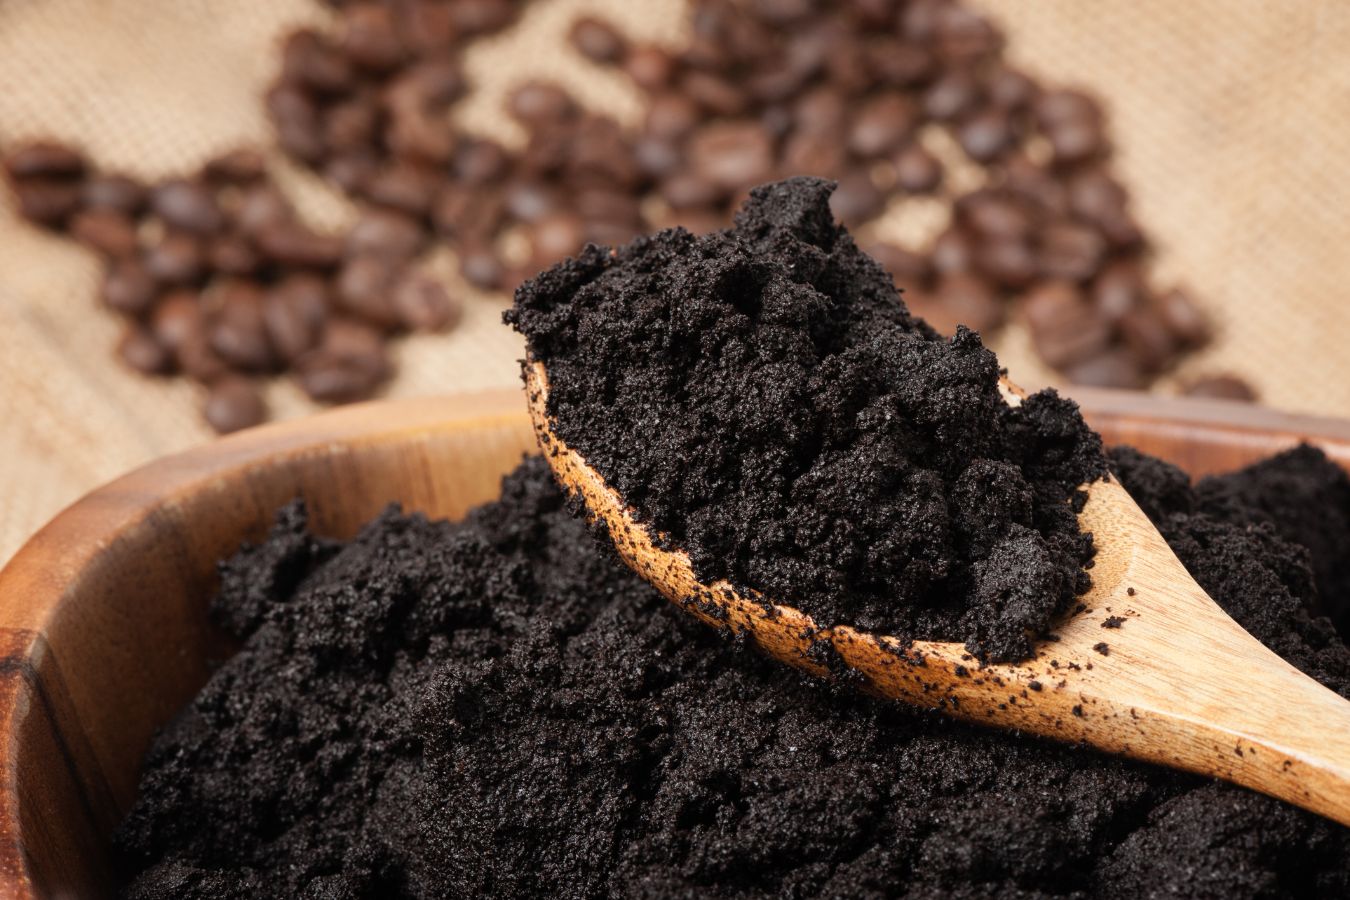 12 Uses of Coffee Grounds